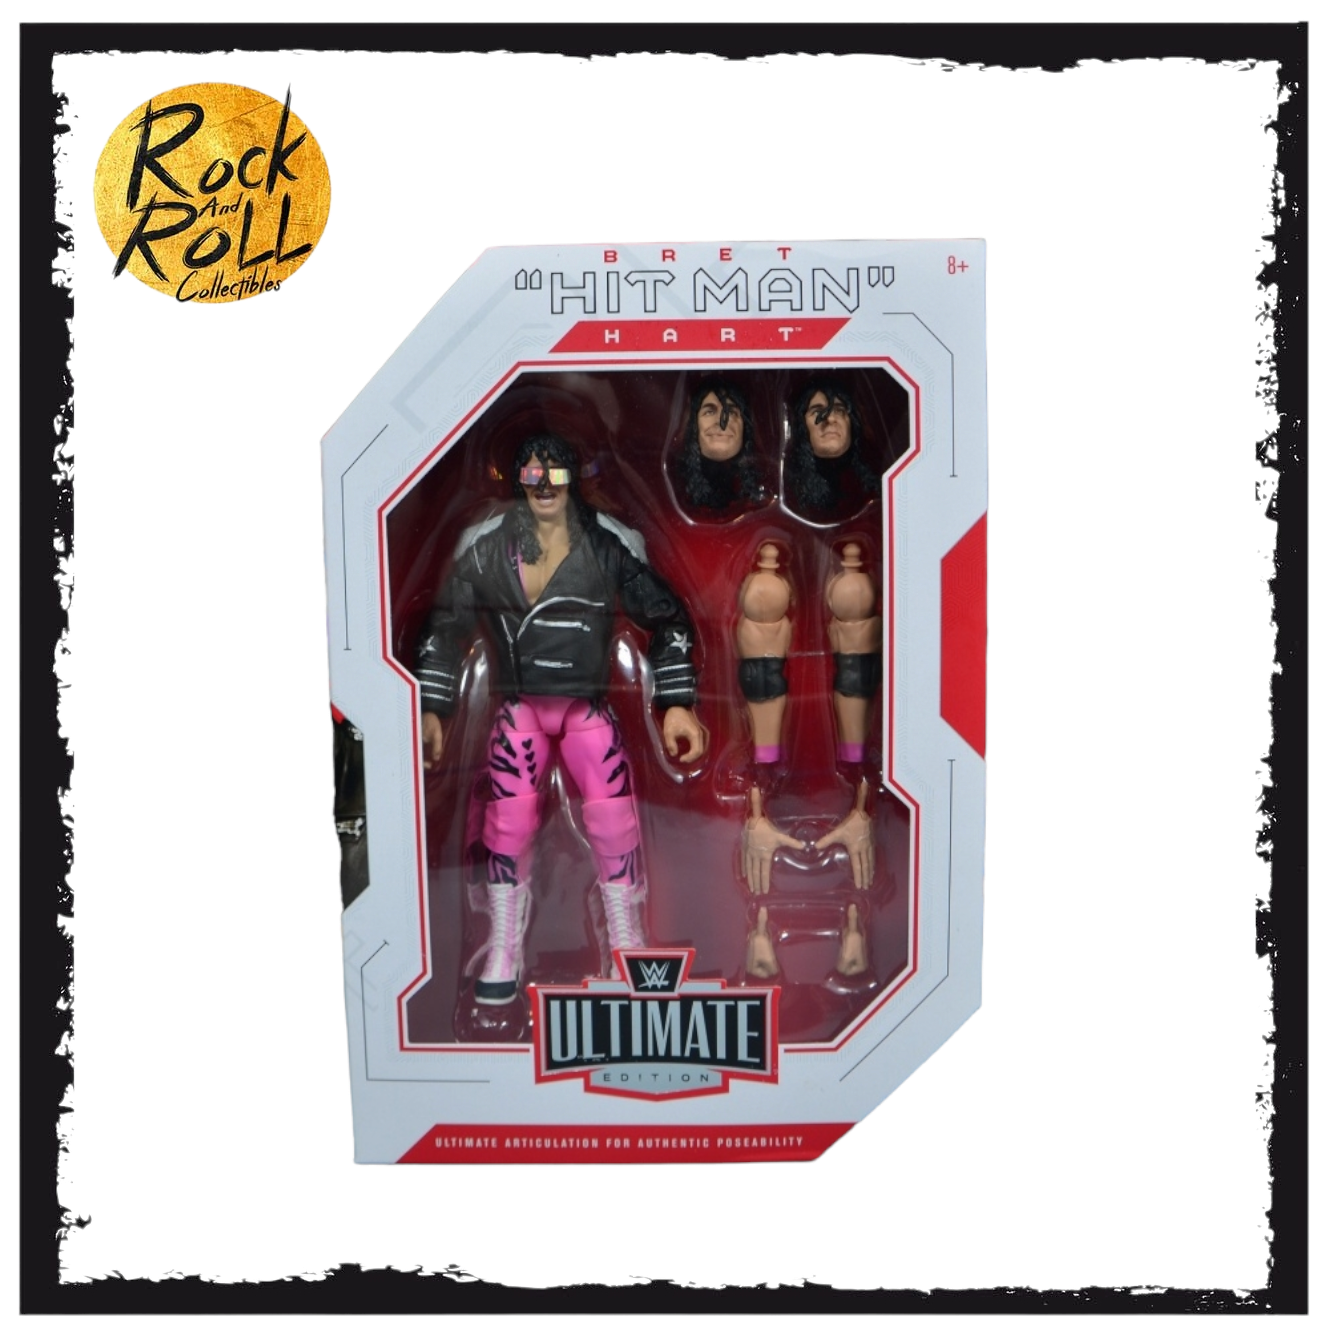 (Not Mint Packaging) Bret Hart - WWE Best of Ultimate Edition 1 US Import